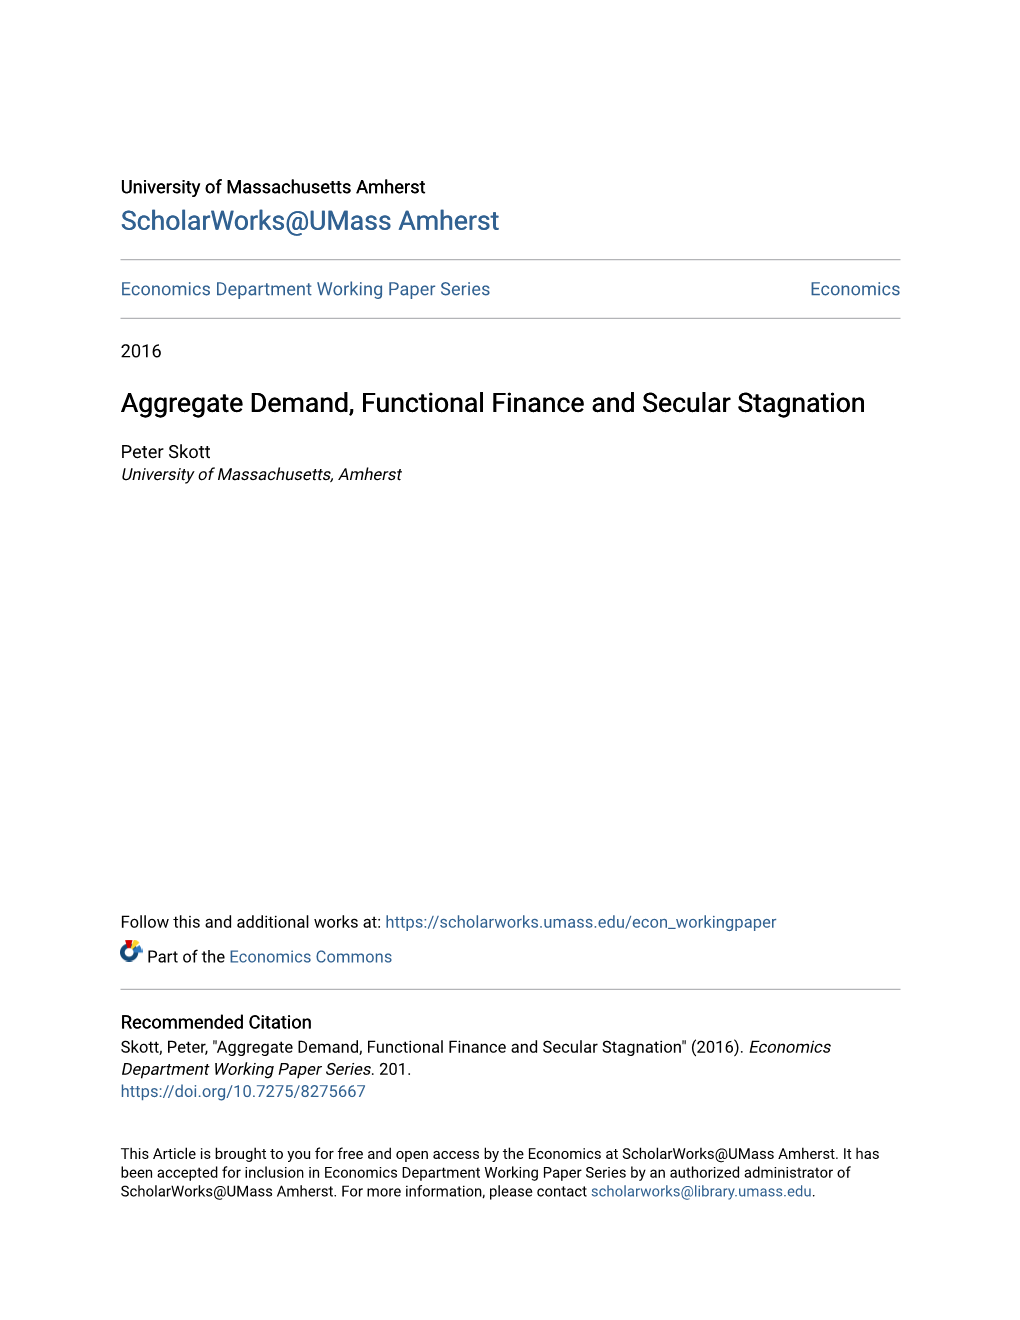 Aggregate Demand, Functional Finance and Secular Stagnation